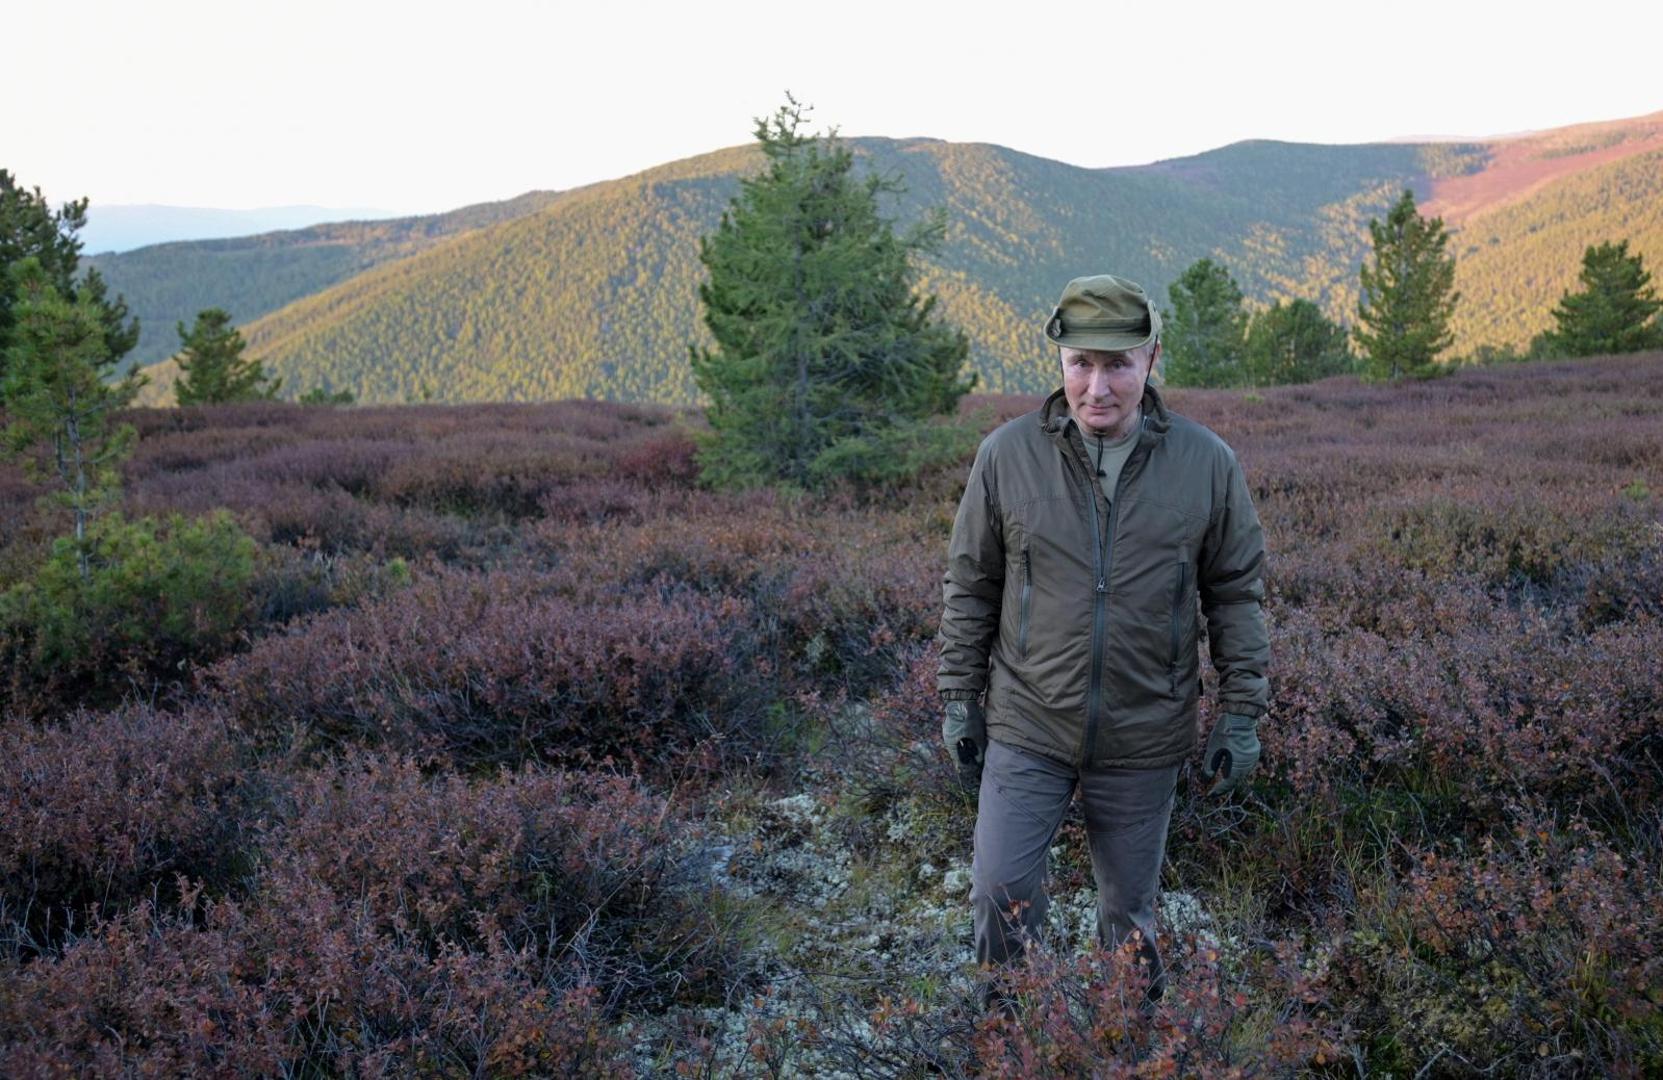 Russian President Vladimir Putin spends vacations in Siberia Russian President Vladimir Putin spends a short vacation at an unknown location in Siberia, Russia, in this undated photo taken in September 2021 and released September 26, 2021. Sputnik/Alexei Druzhinin/Kremlin via REUTERS  ATTENTION EDITORS - THIS IMAGE WAS PROVIDED BY A THIRD PARTY. SPUTNIK